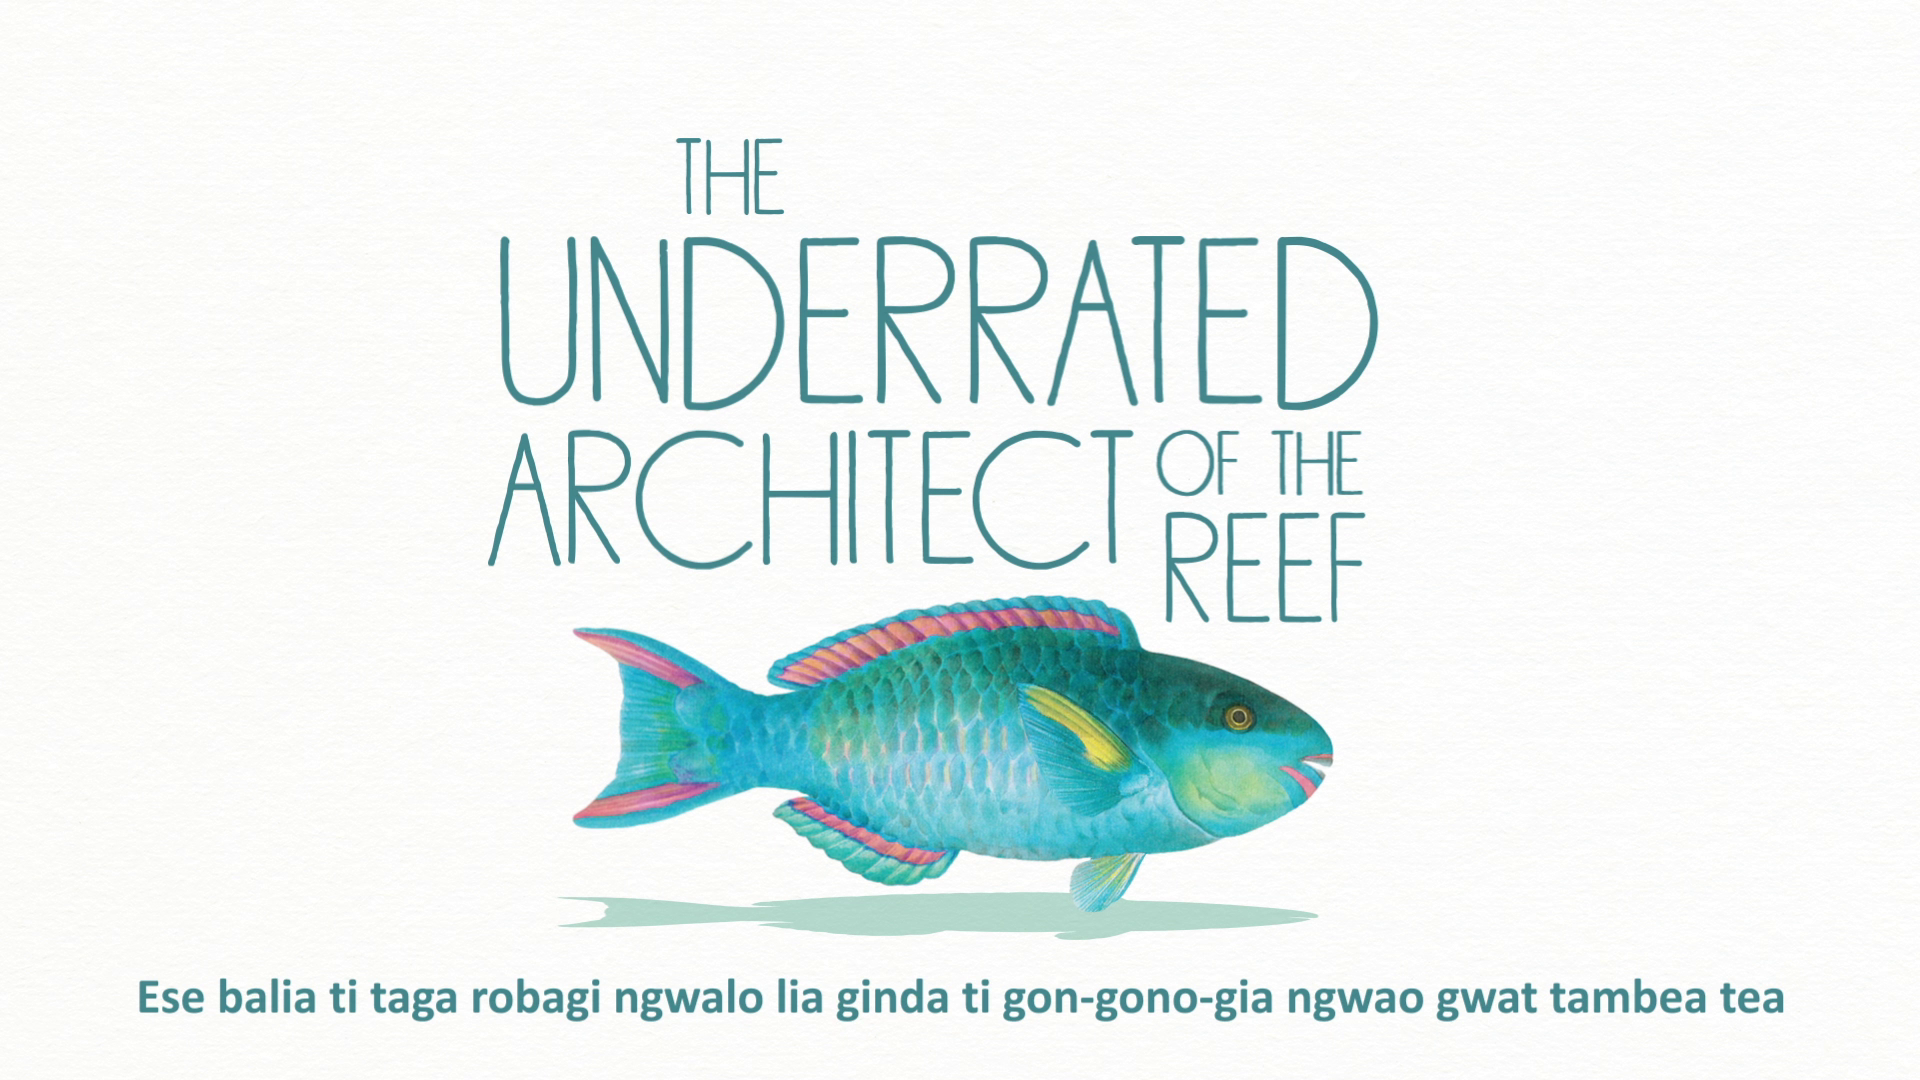 The Fisher's Tales 01 (Maewo): Do you know that parrotfish act like architect of the reef?